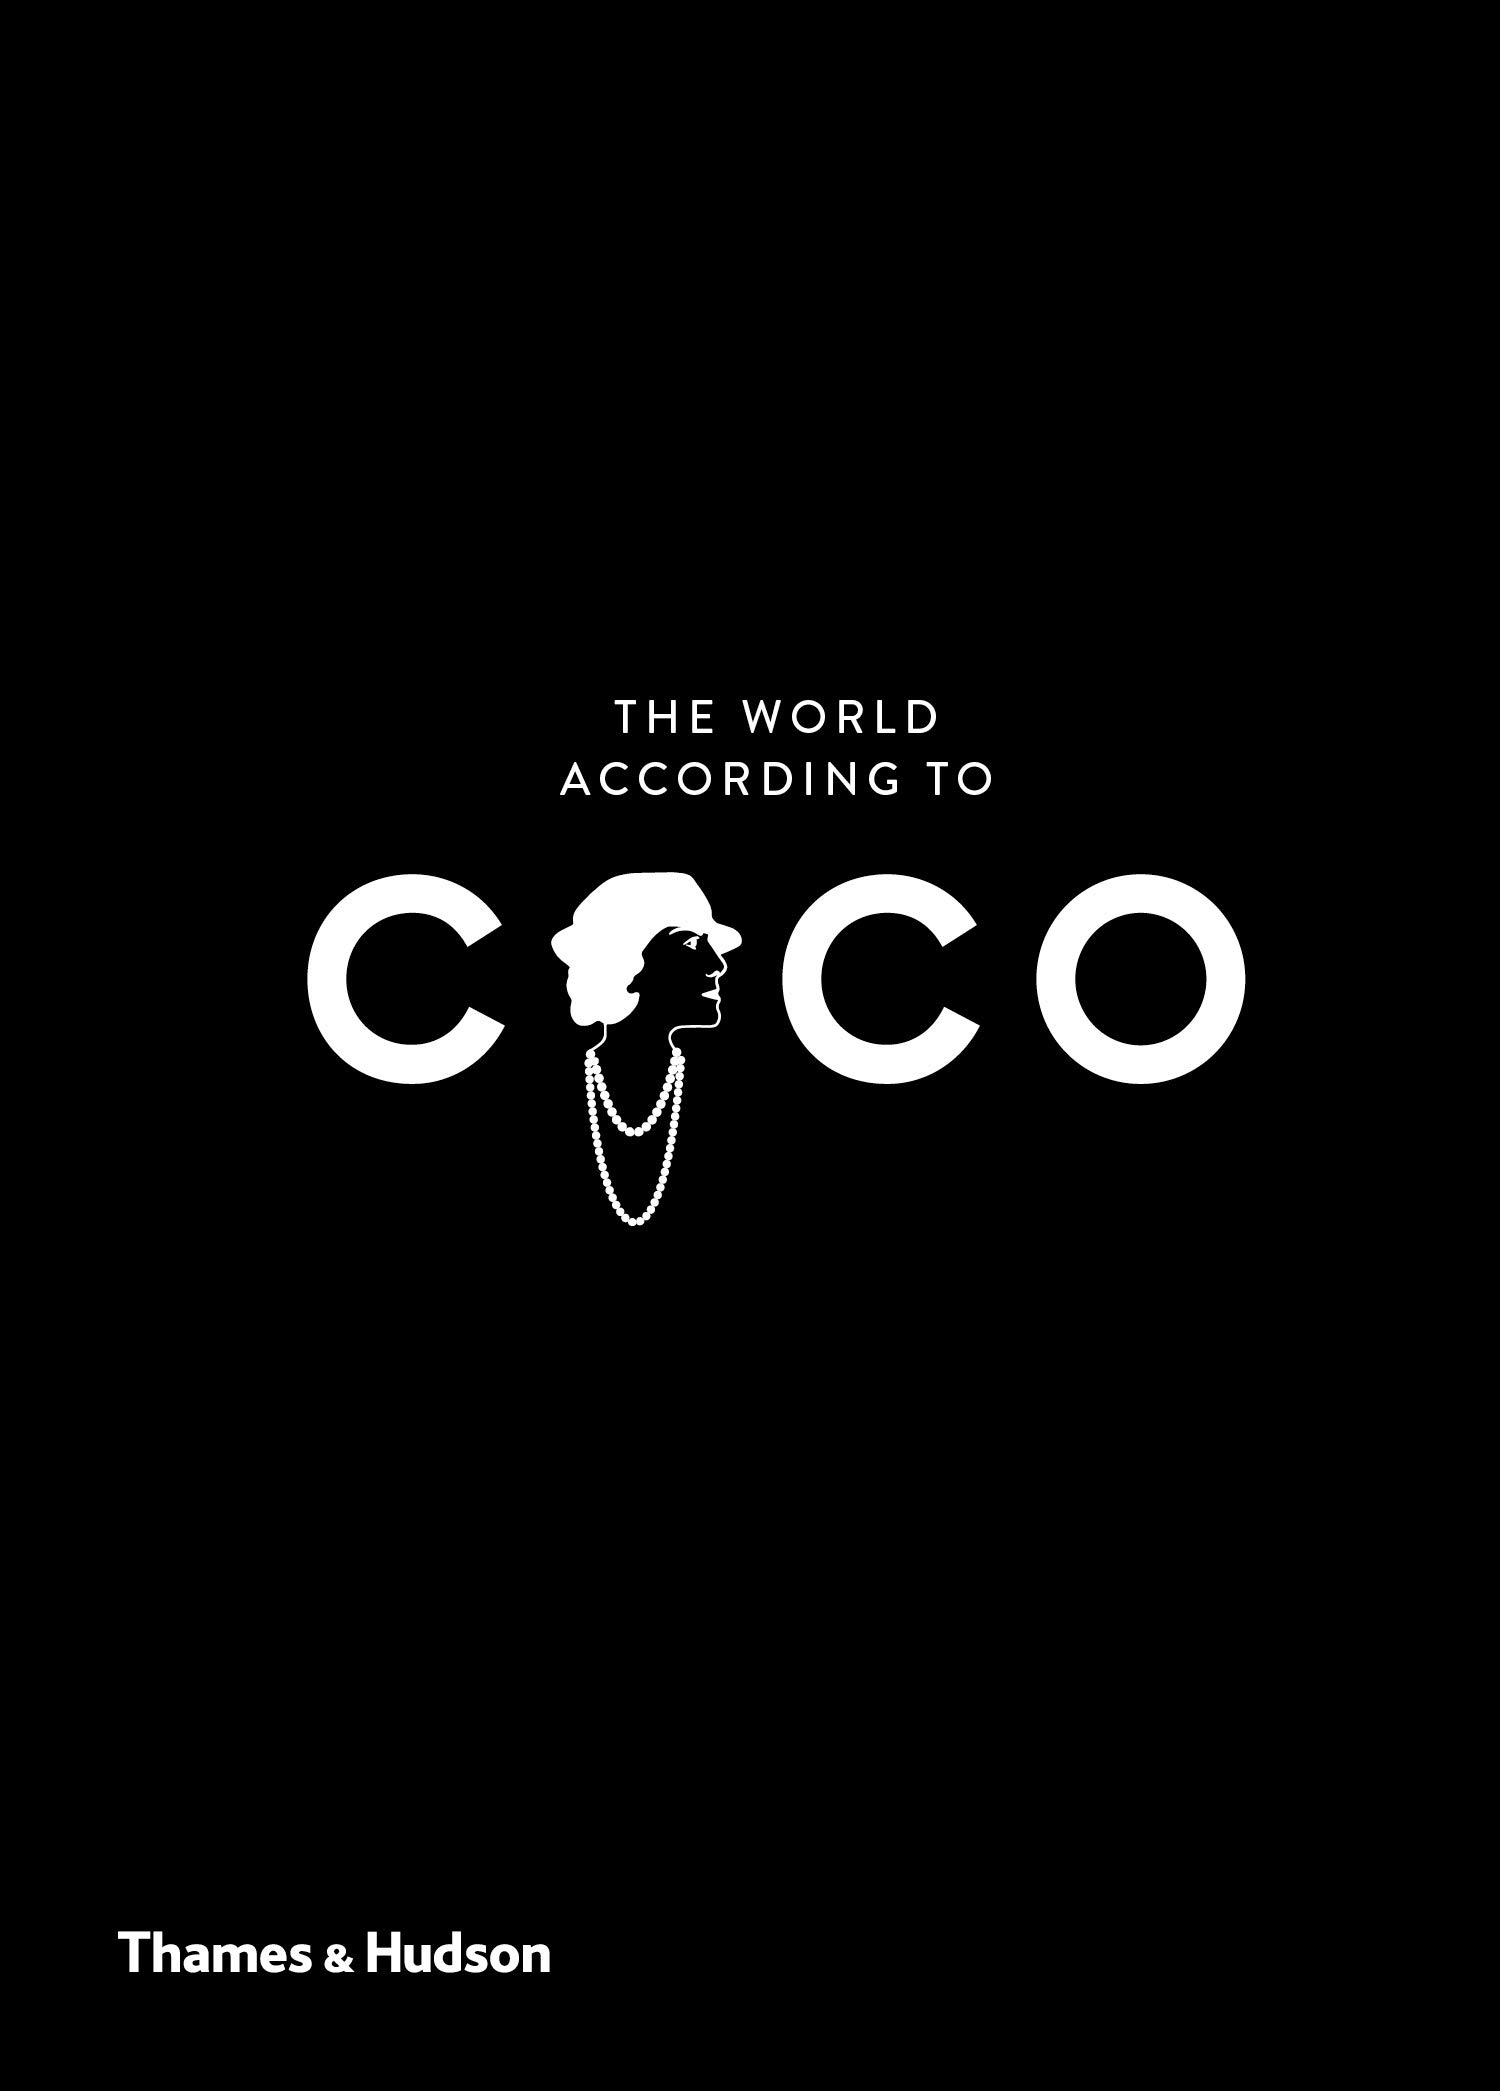 World According to Coco - The Wit and Wisdom of Coco Chanel | Jean-Christophe Napias, Patrick Mauries